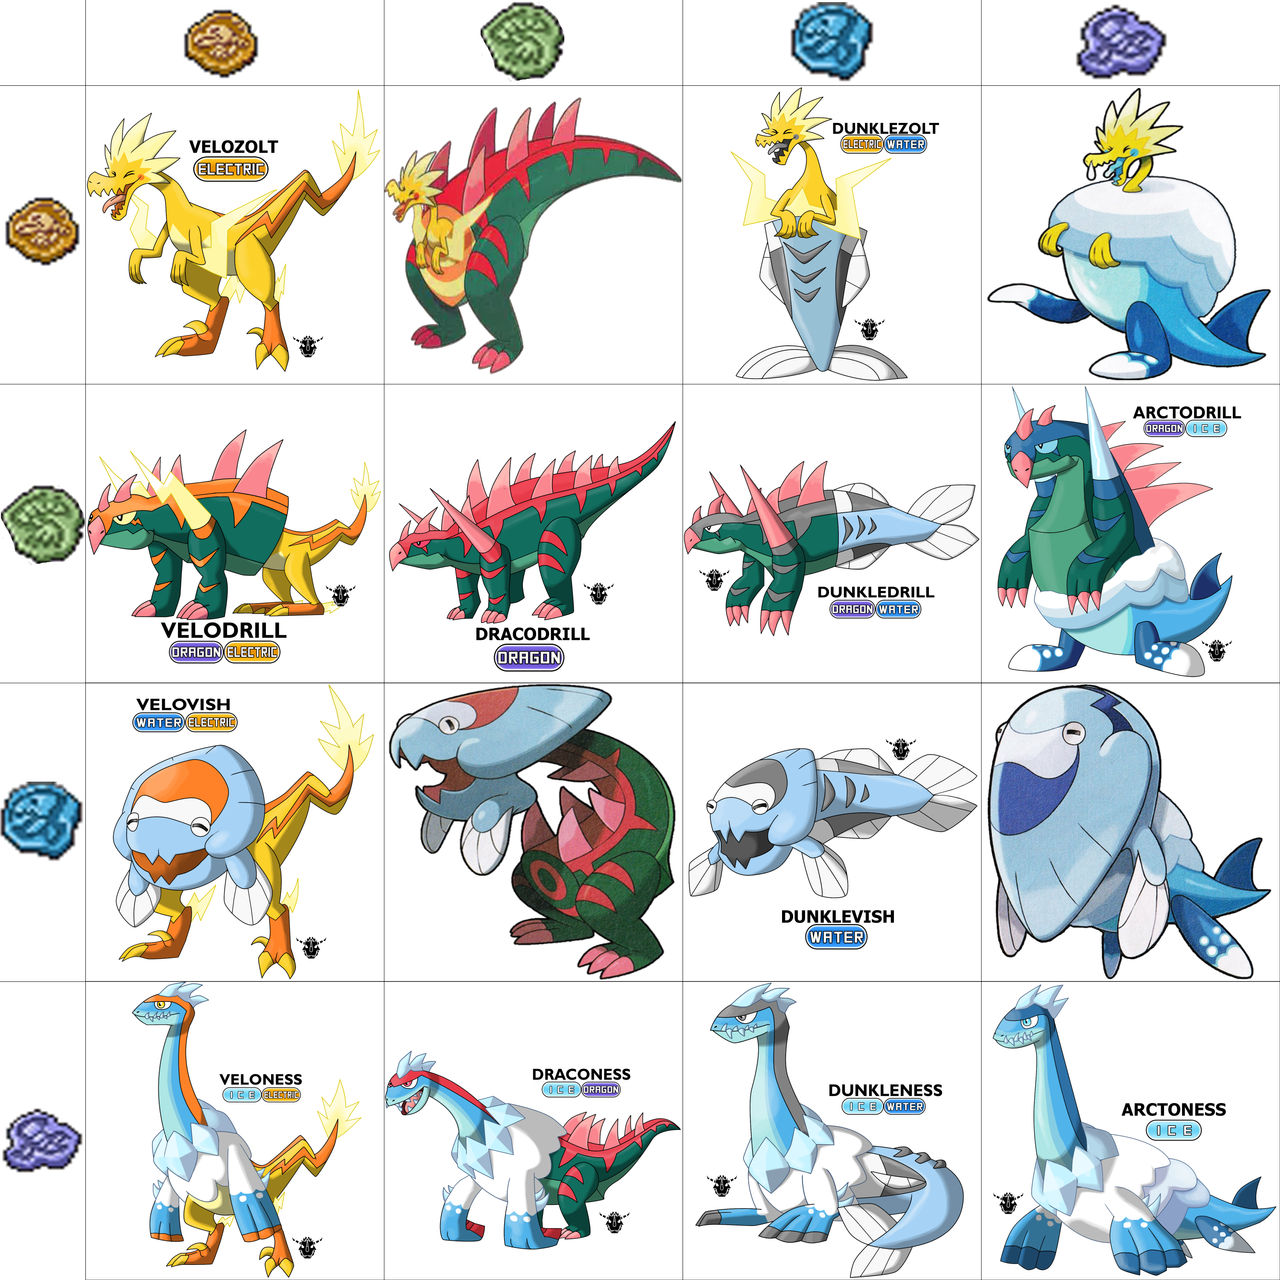 restored_galar_fossils_and_combinations_by_rzgmon200_ddn27yh-fullview.jpg